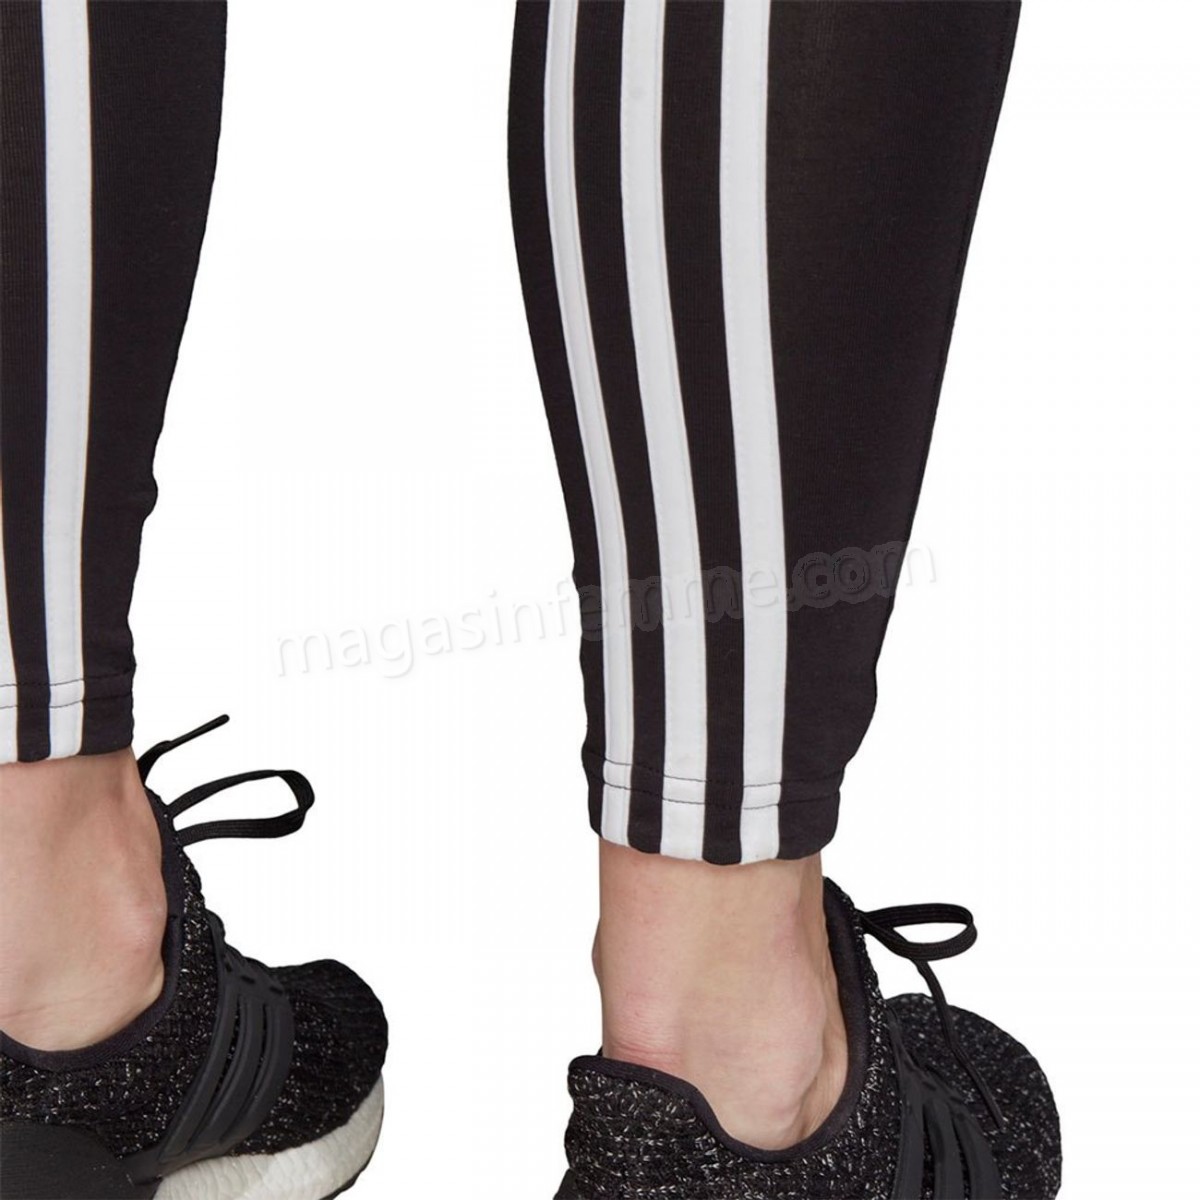 Adidas-Fitness femme ADIDAS Collant femme adidas Must Haves 3-Stripes en solde - -6